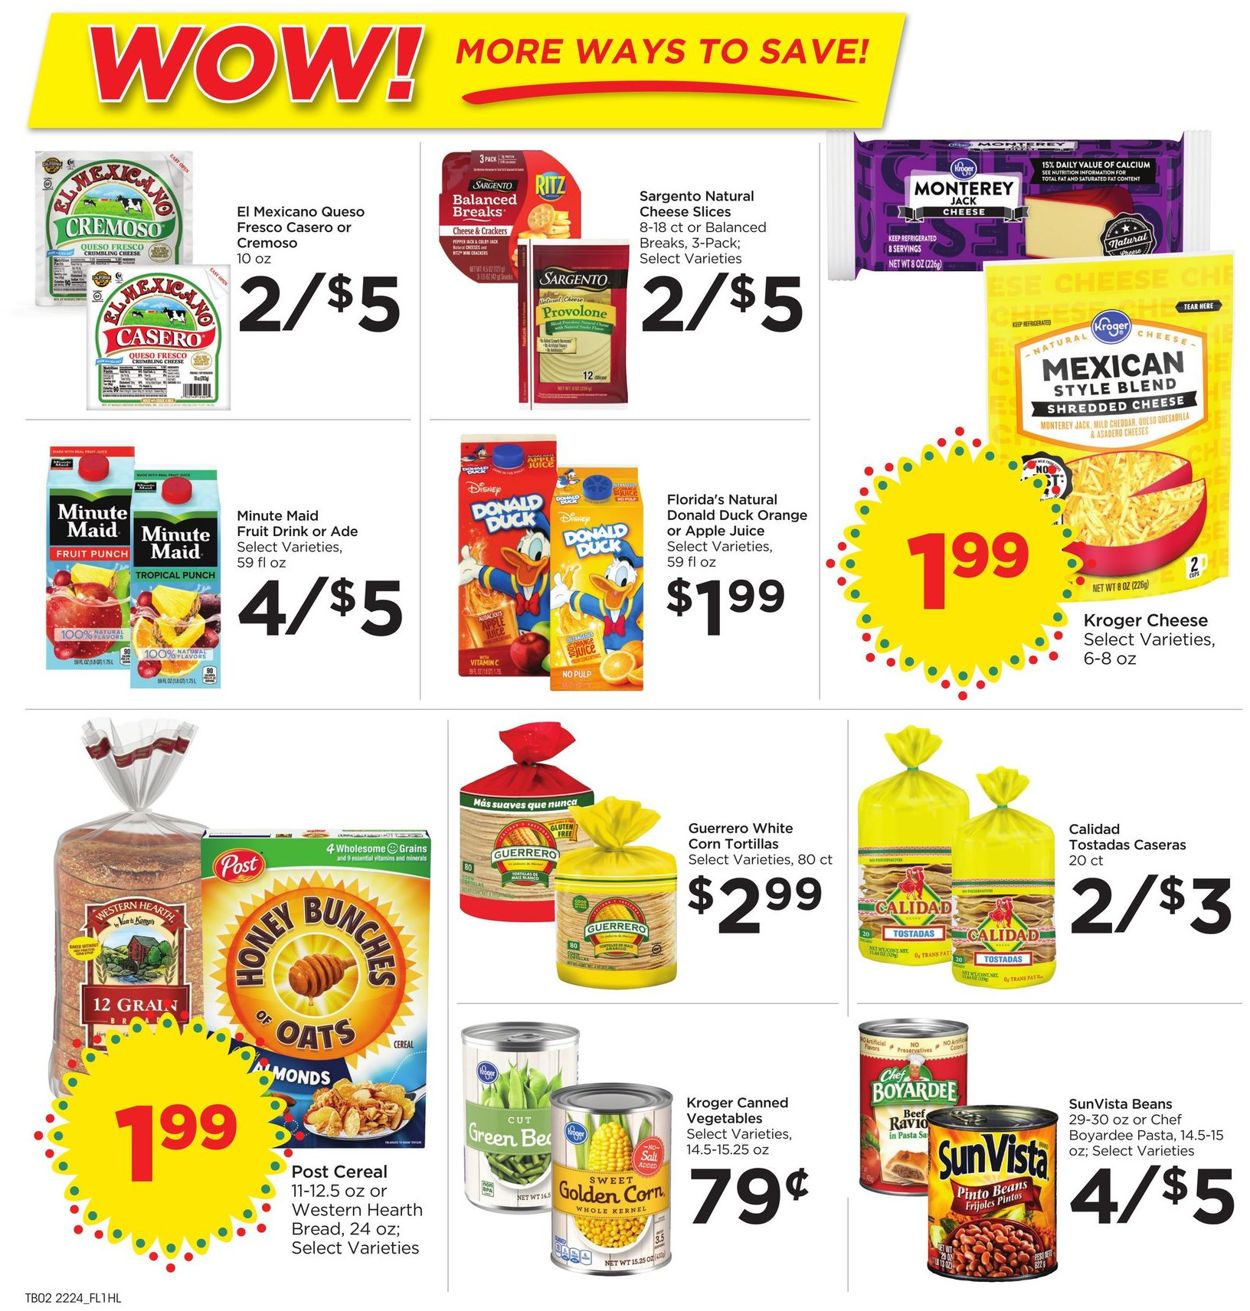 Catalogue Food 4 Less from 07/13/2022